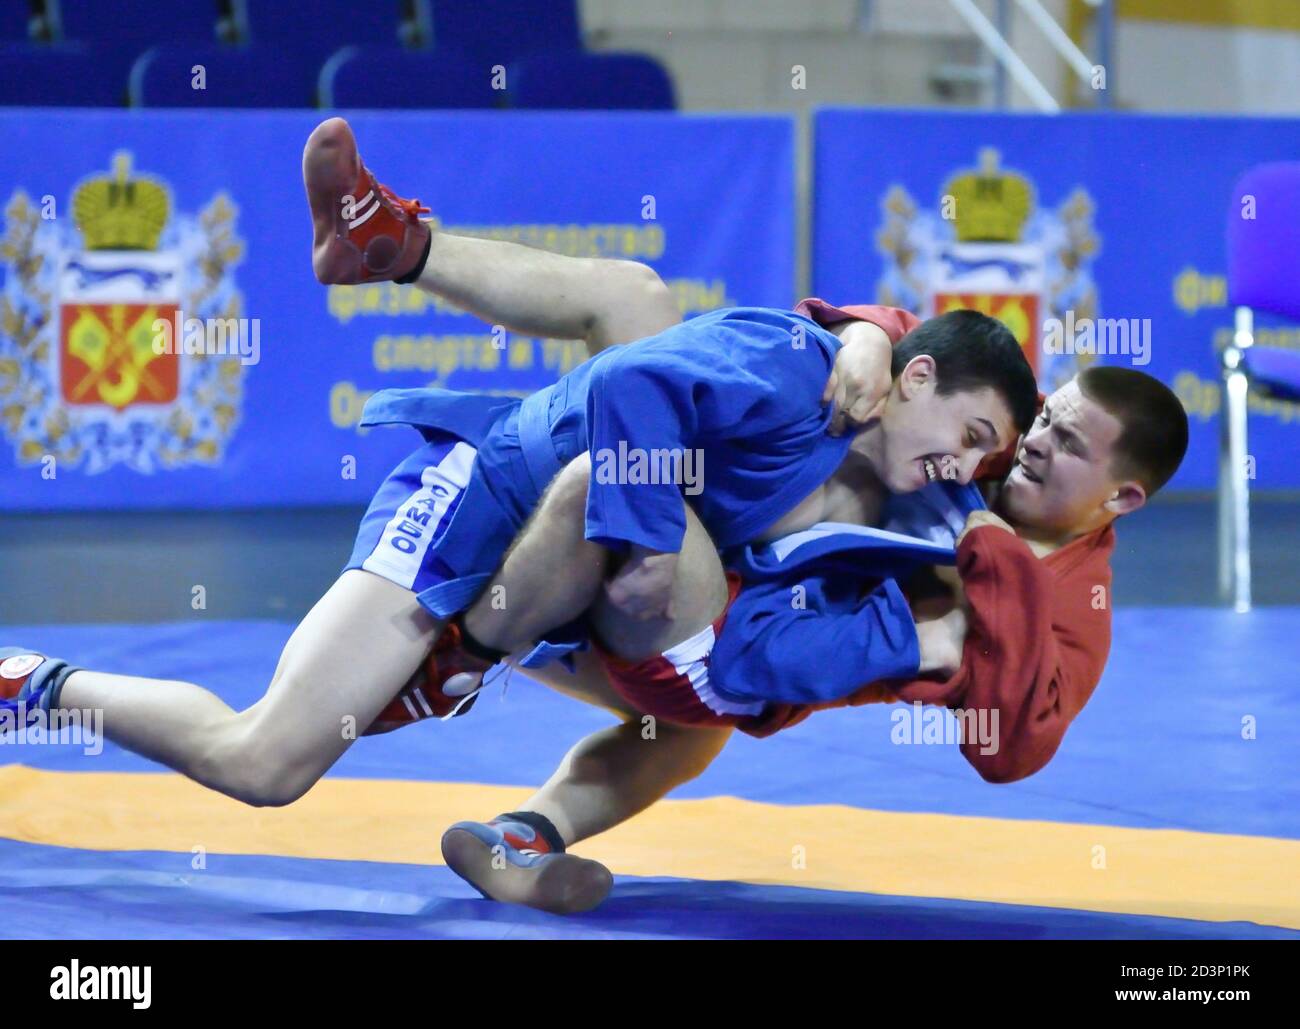 Orenburg, Russia - October 25-26, 2019: Boys competitions Self-defense without weapons in the Championship of the Orenburg region among boys and girls Stock Photo